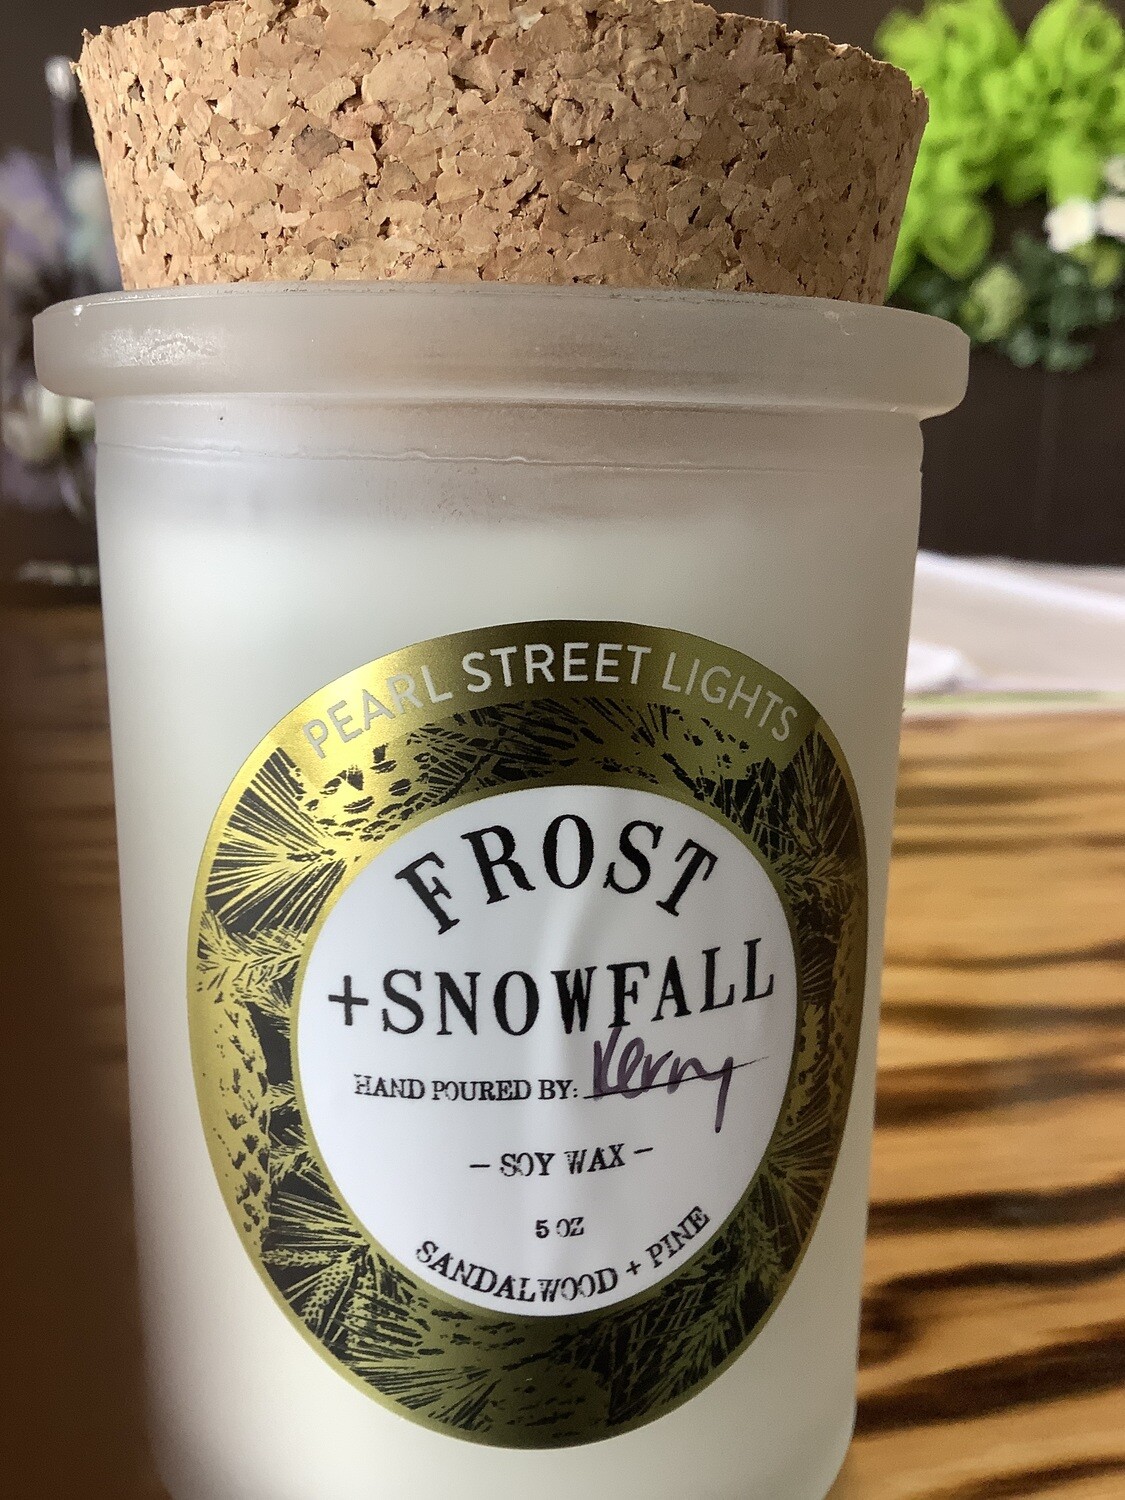 FROST + SNOWFALL CRACKLING WOODEN WICK CANDLE